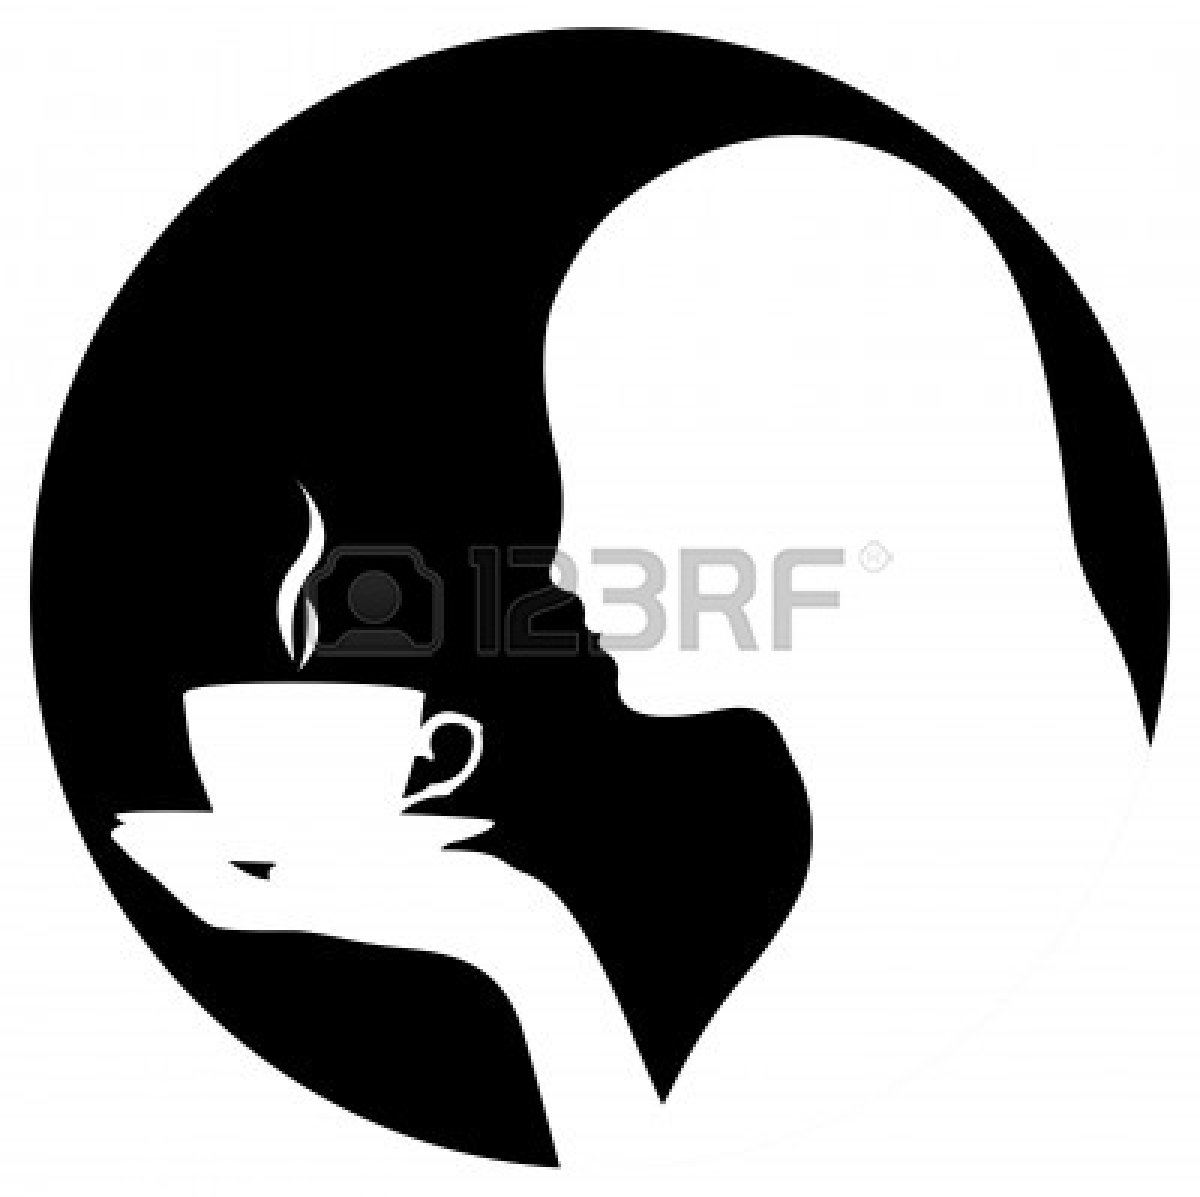 Coffee Pot Silhouette   Clipart Panda   Free Clipart Images